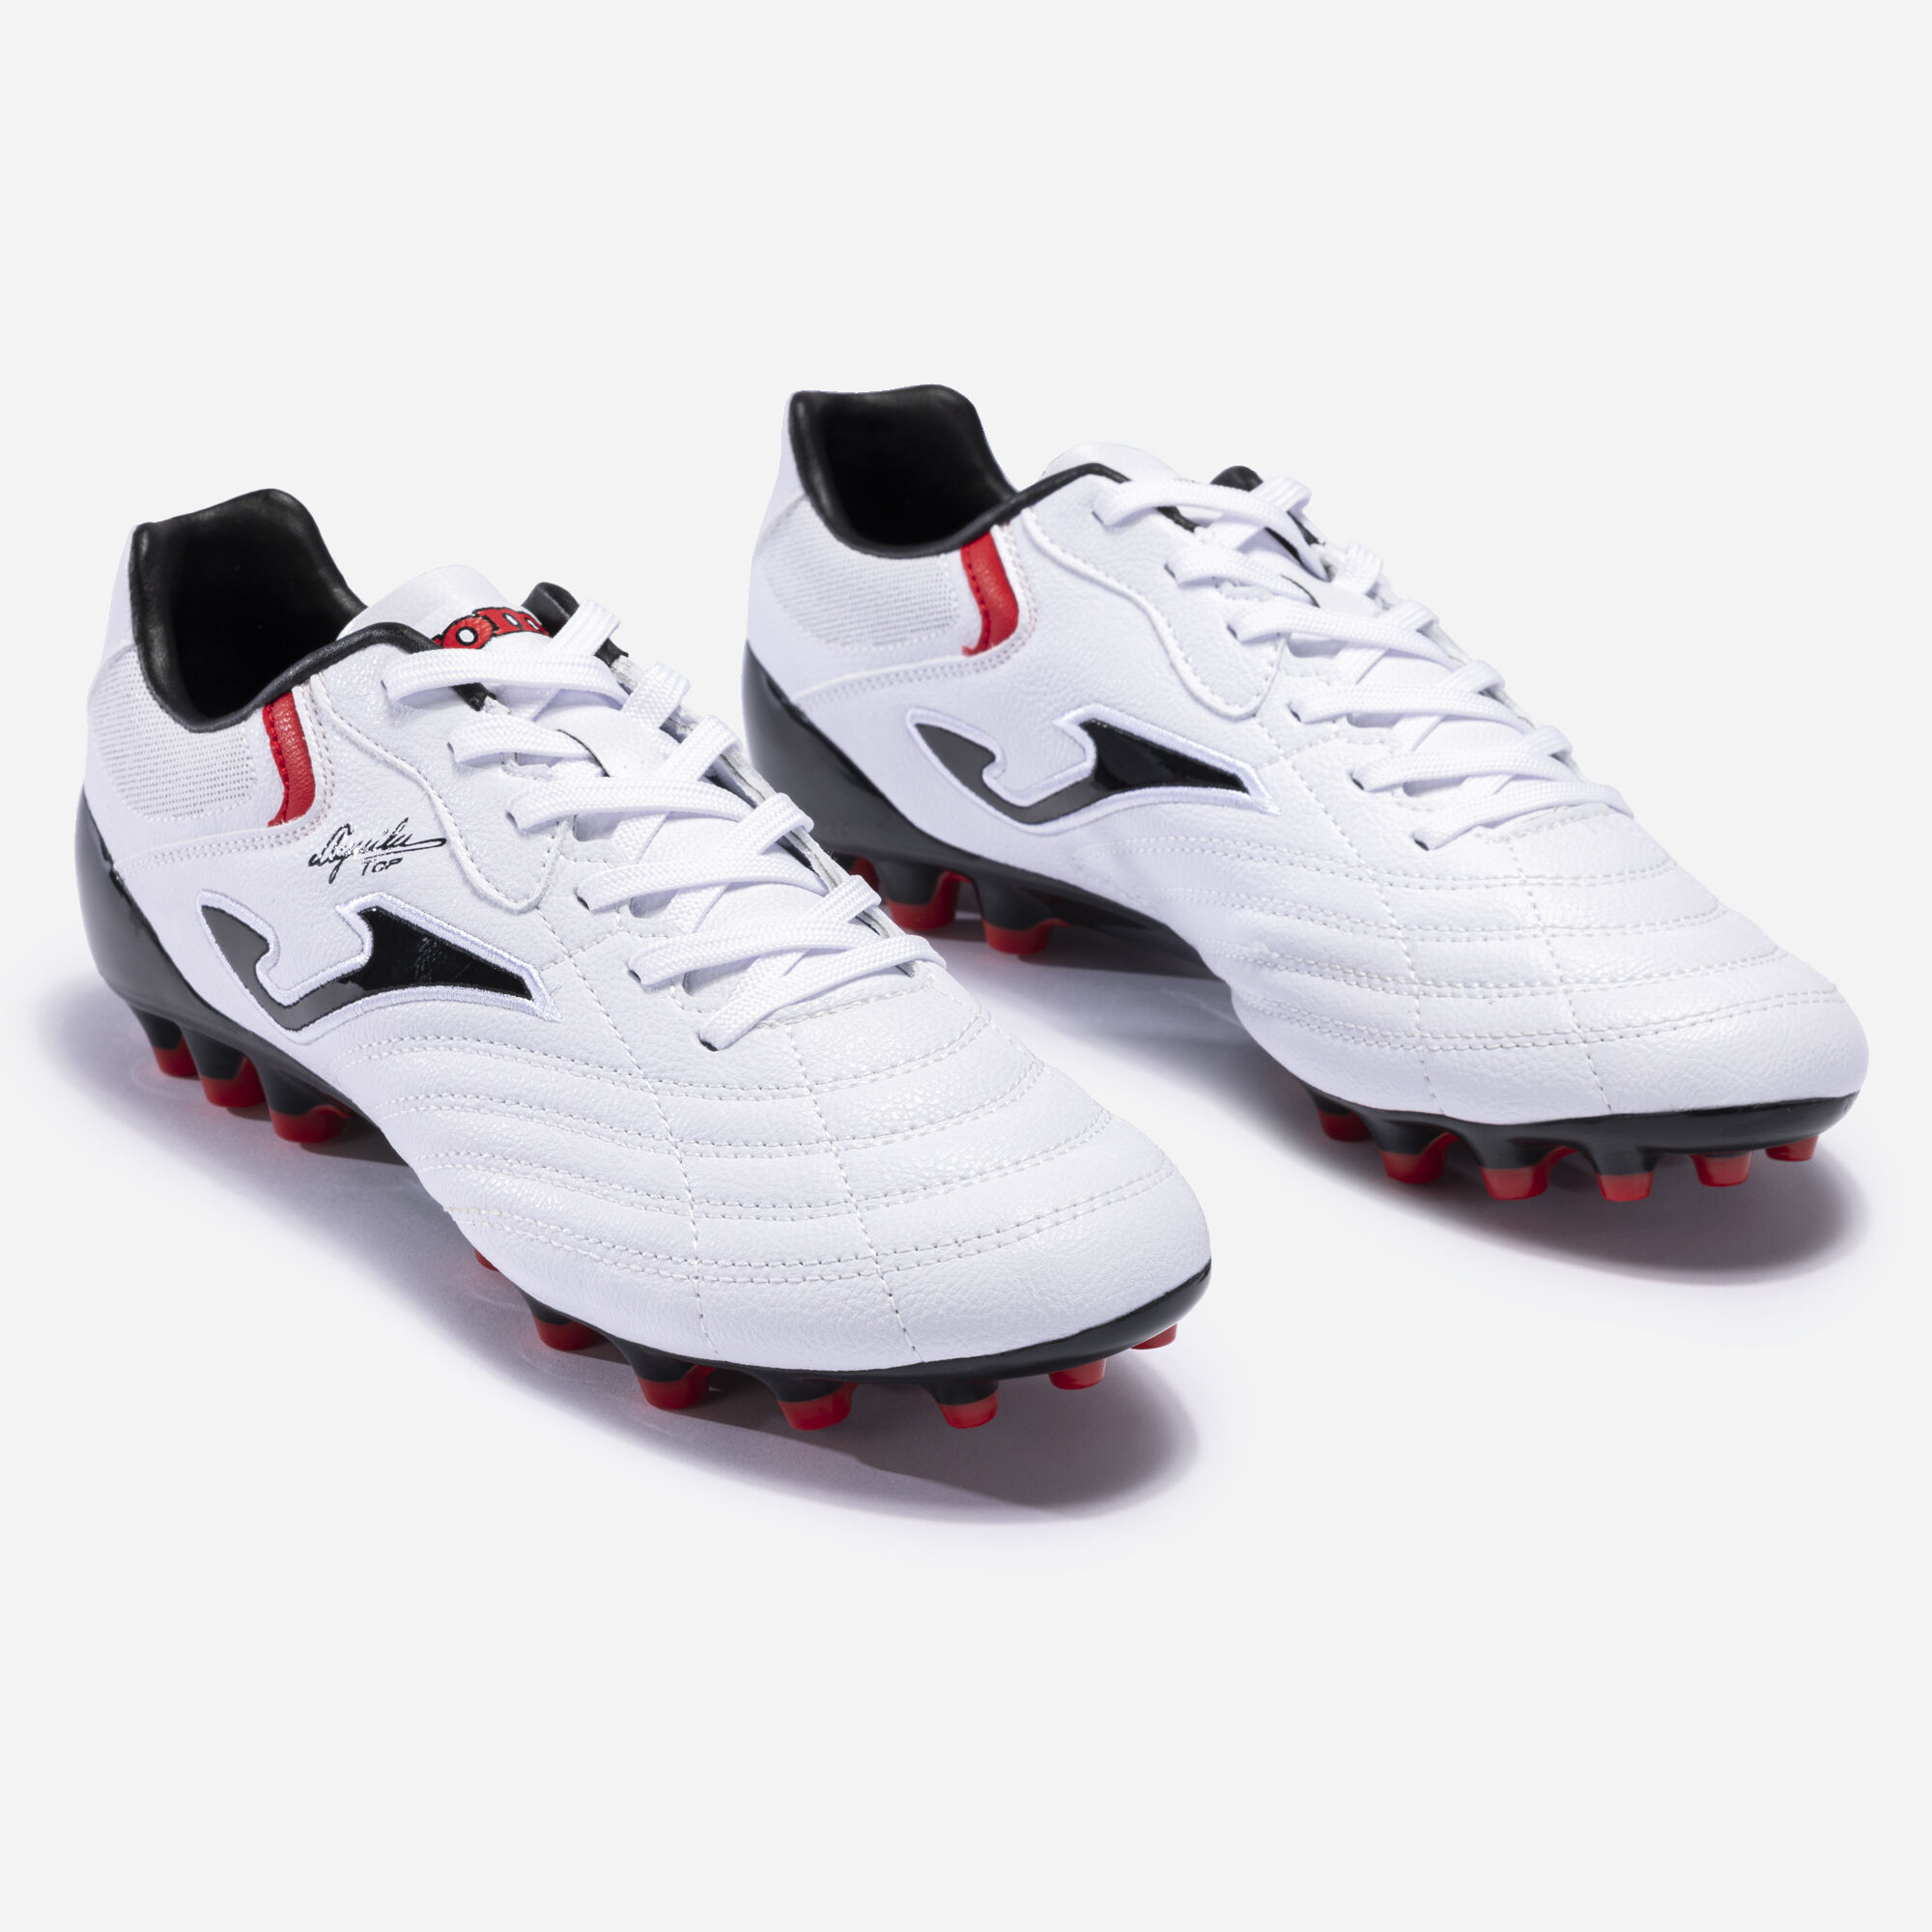 Football boots Aguila Cup 23 artificial grass white red